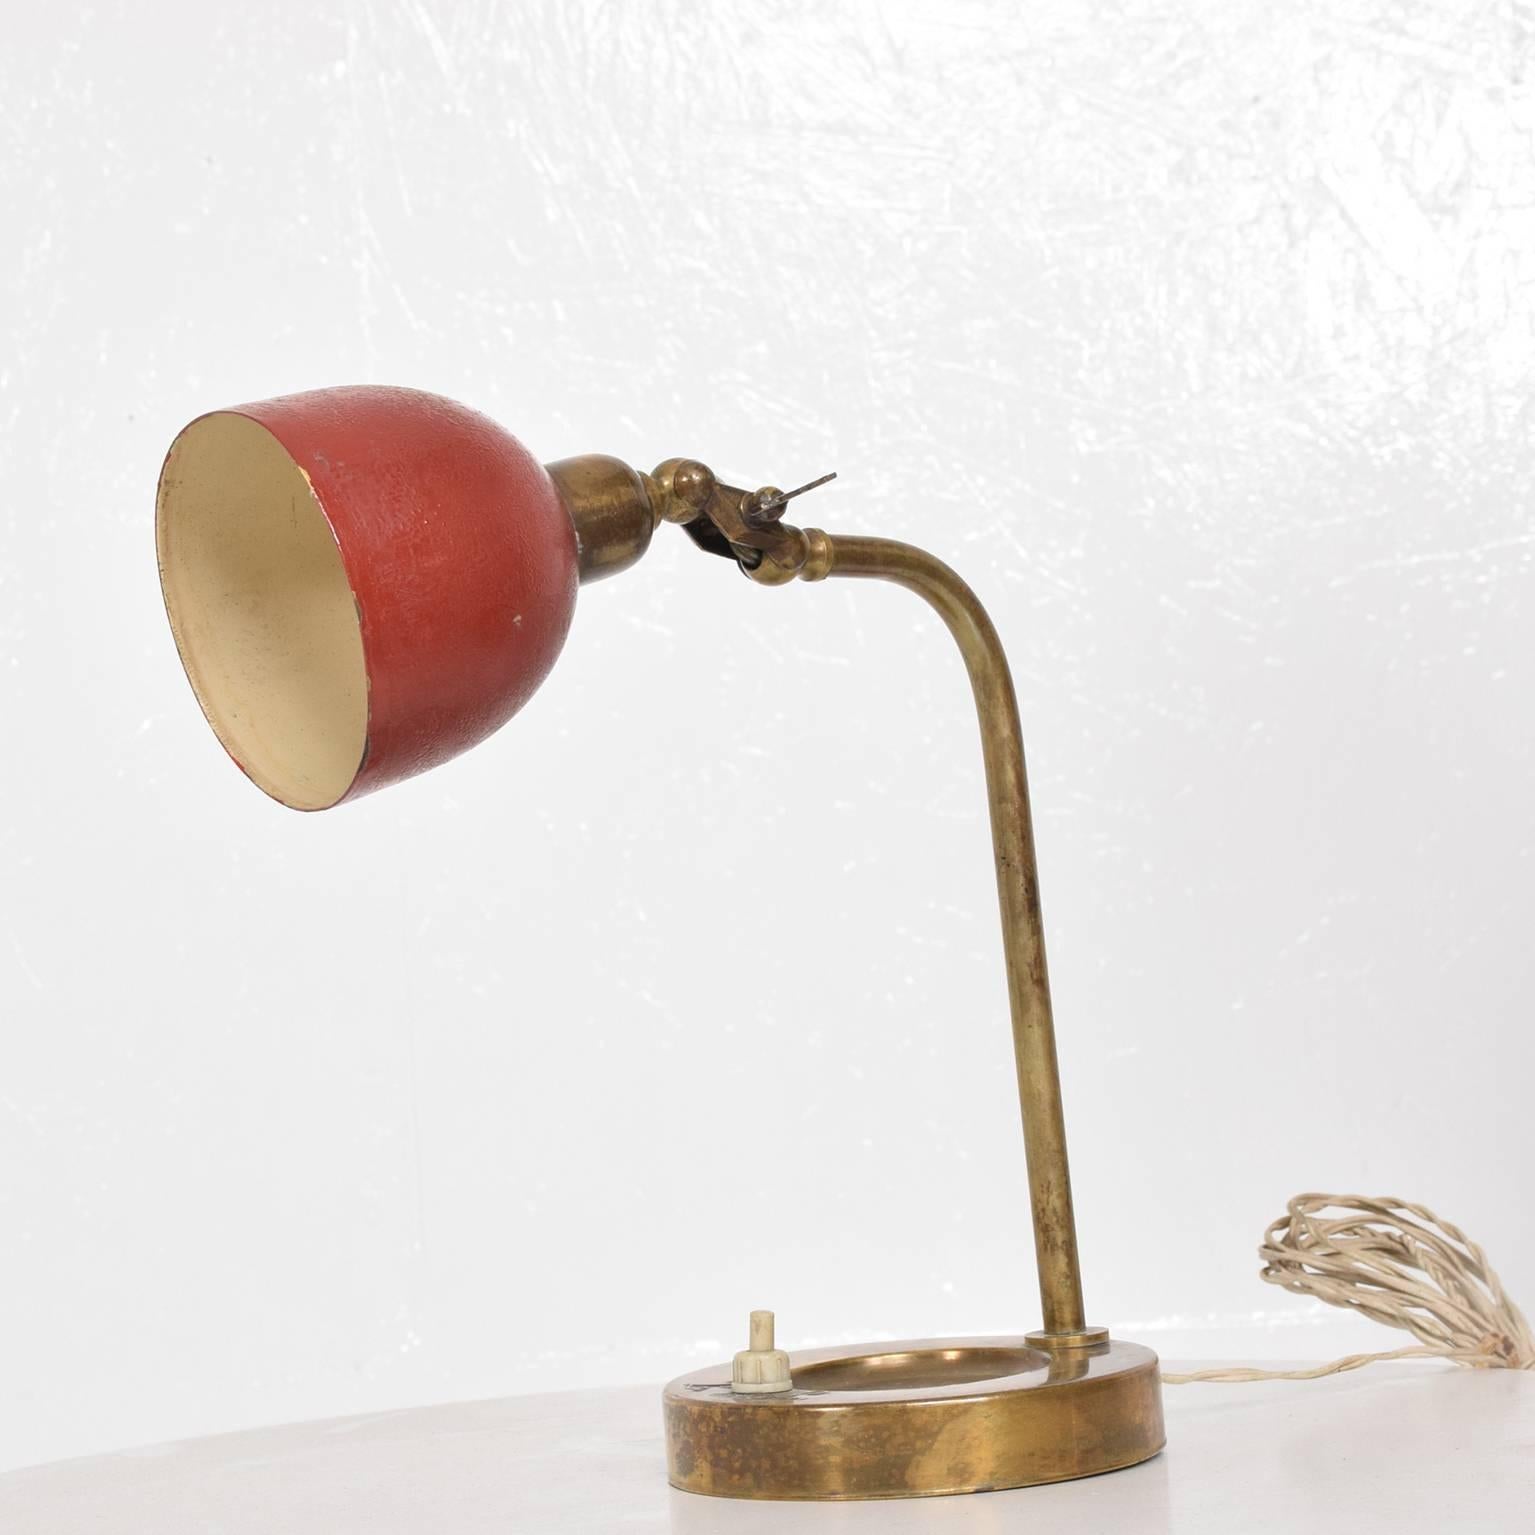 Painted Mid-Century Modern Italian Table Lamp, Wall Sconce with Ashtray